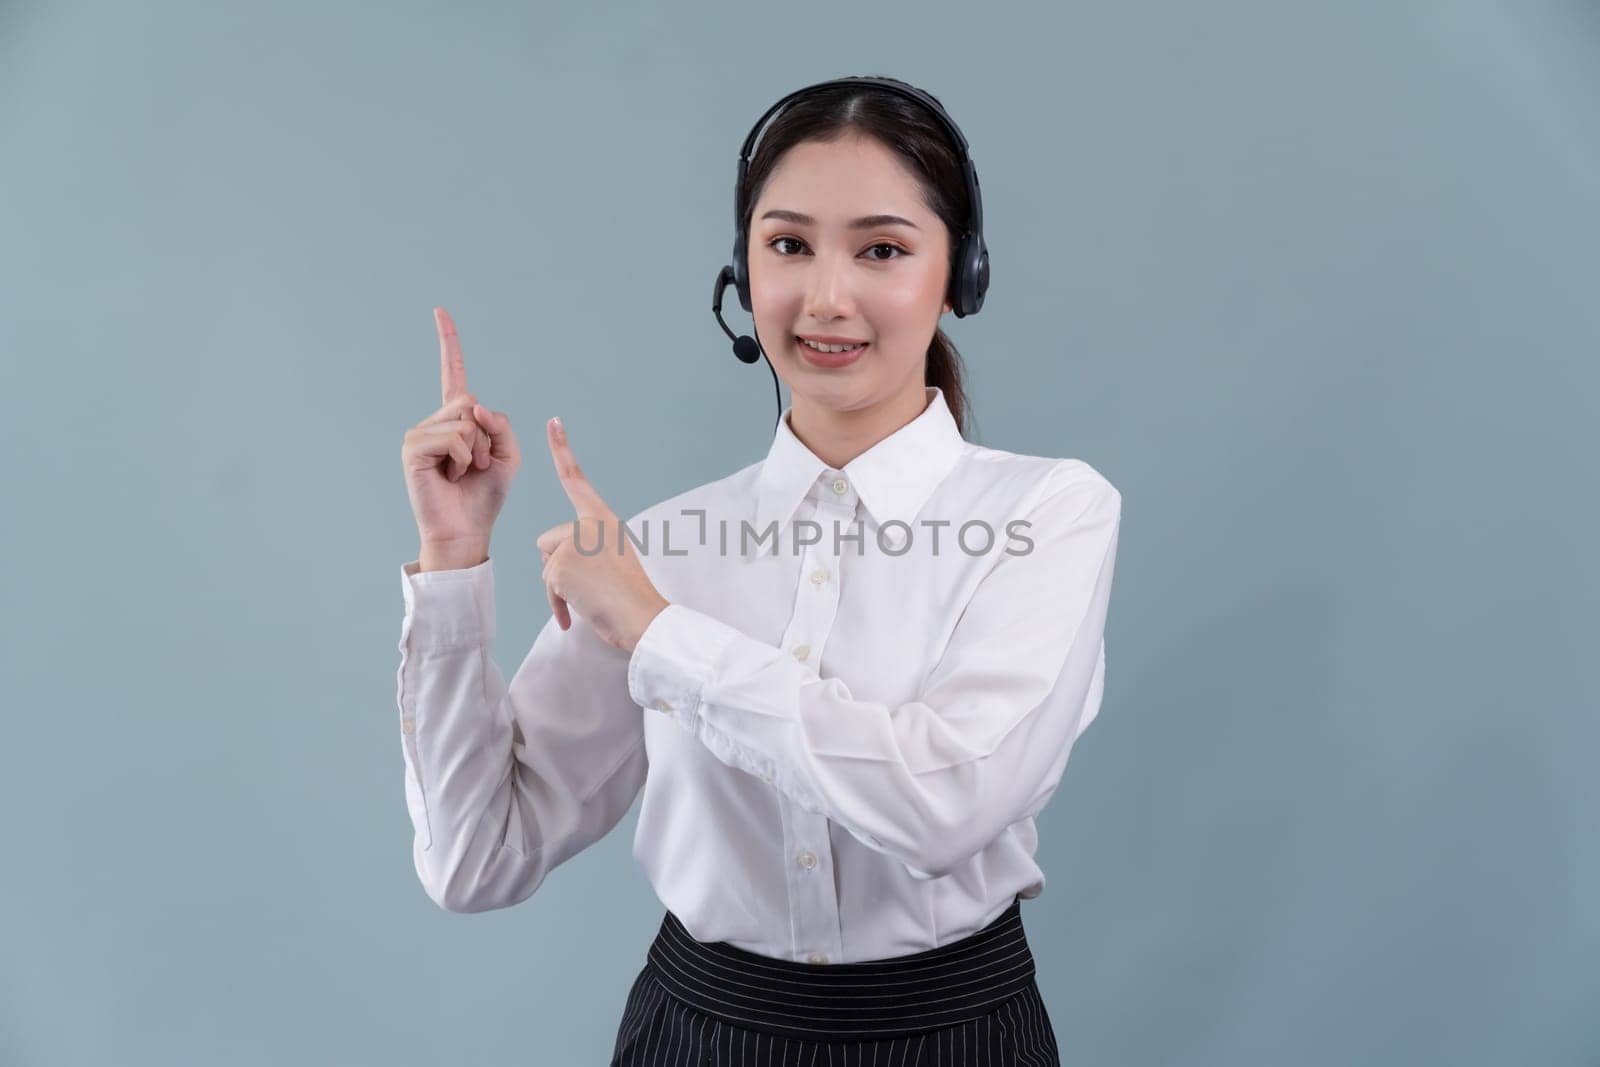 Asian female call center operator with smile face advertises job opportunity, wearing a formal suit and headset pointing finger for product on customizable isolated background. Enthusiastic